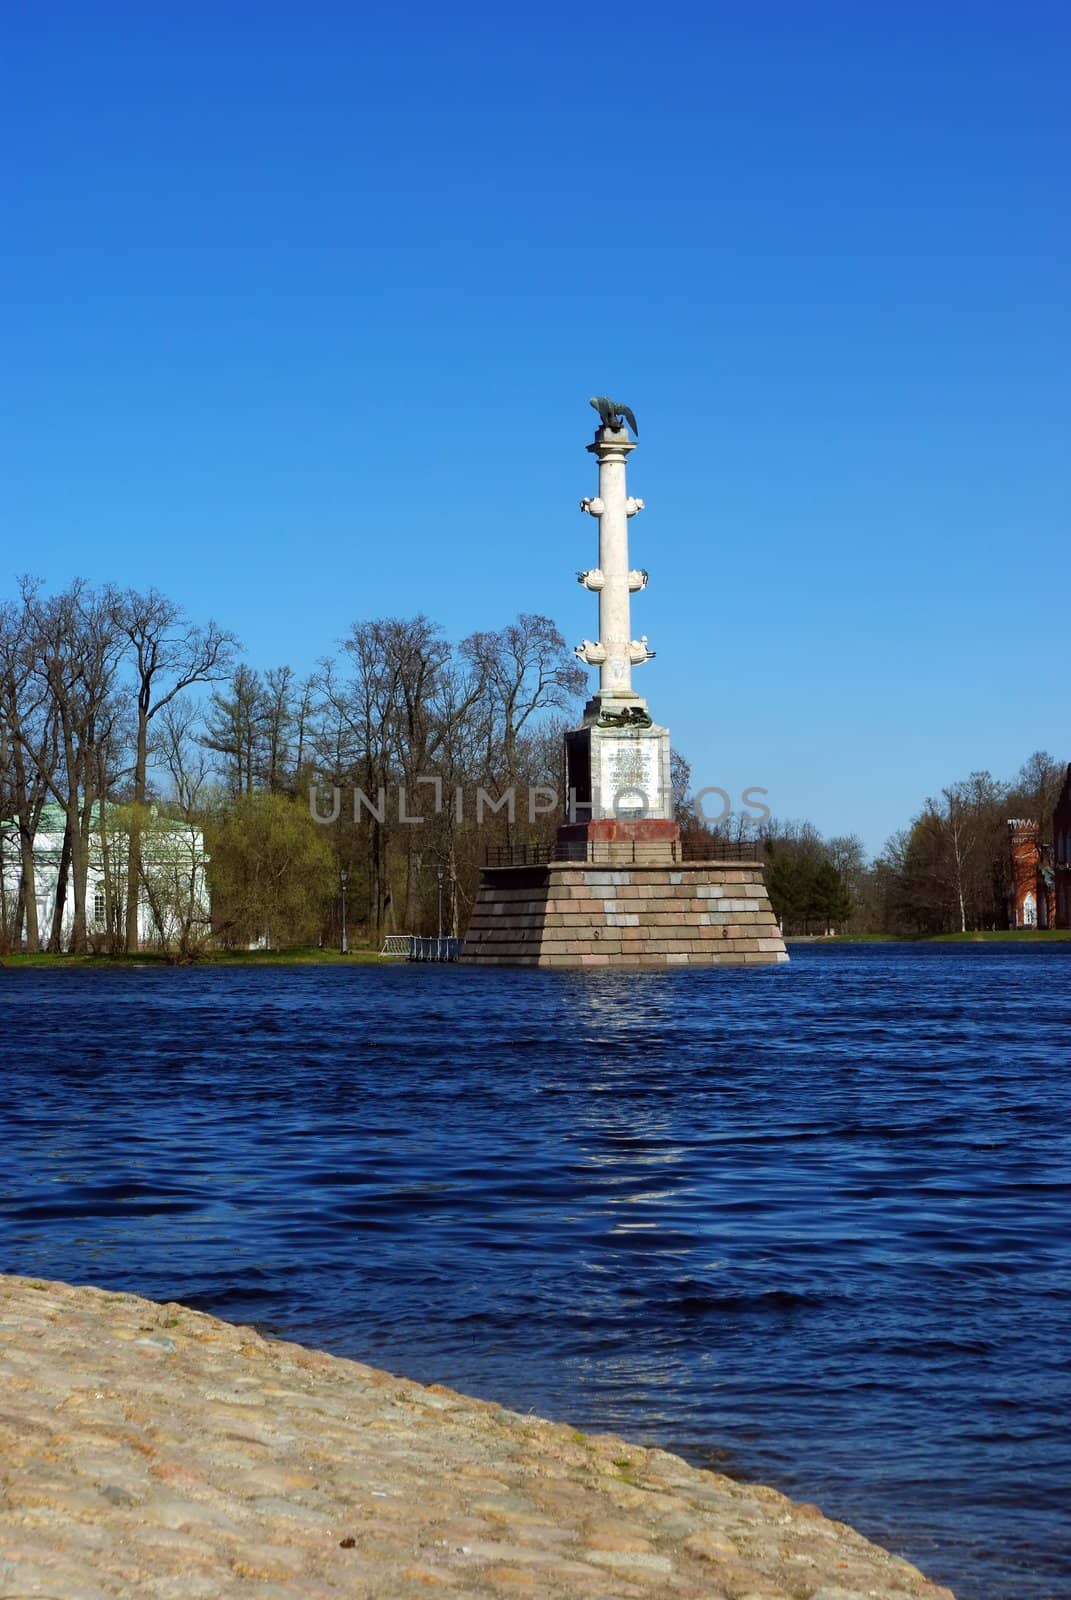 Chesme Column in Tsarskoye Selo commemorates Russian naval victories in the Russo-Turkish War